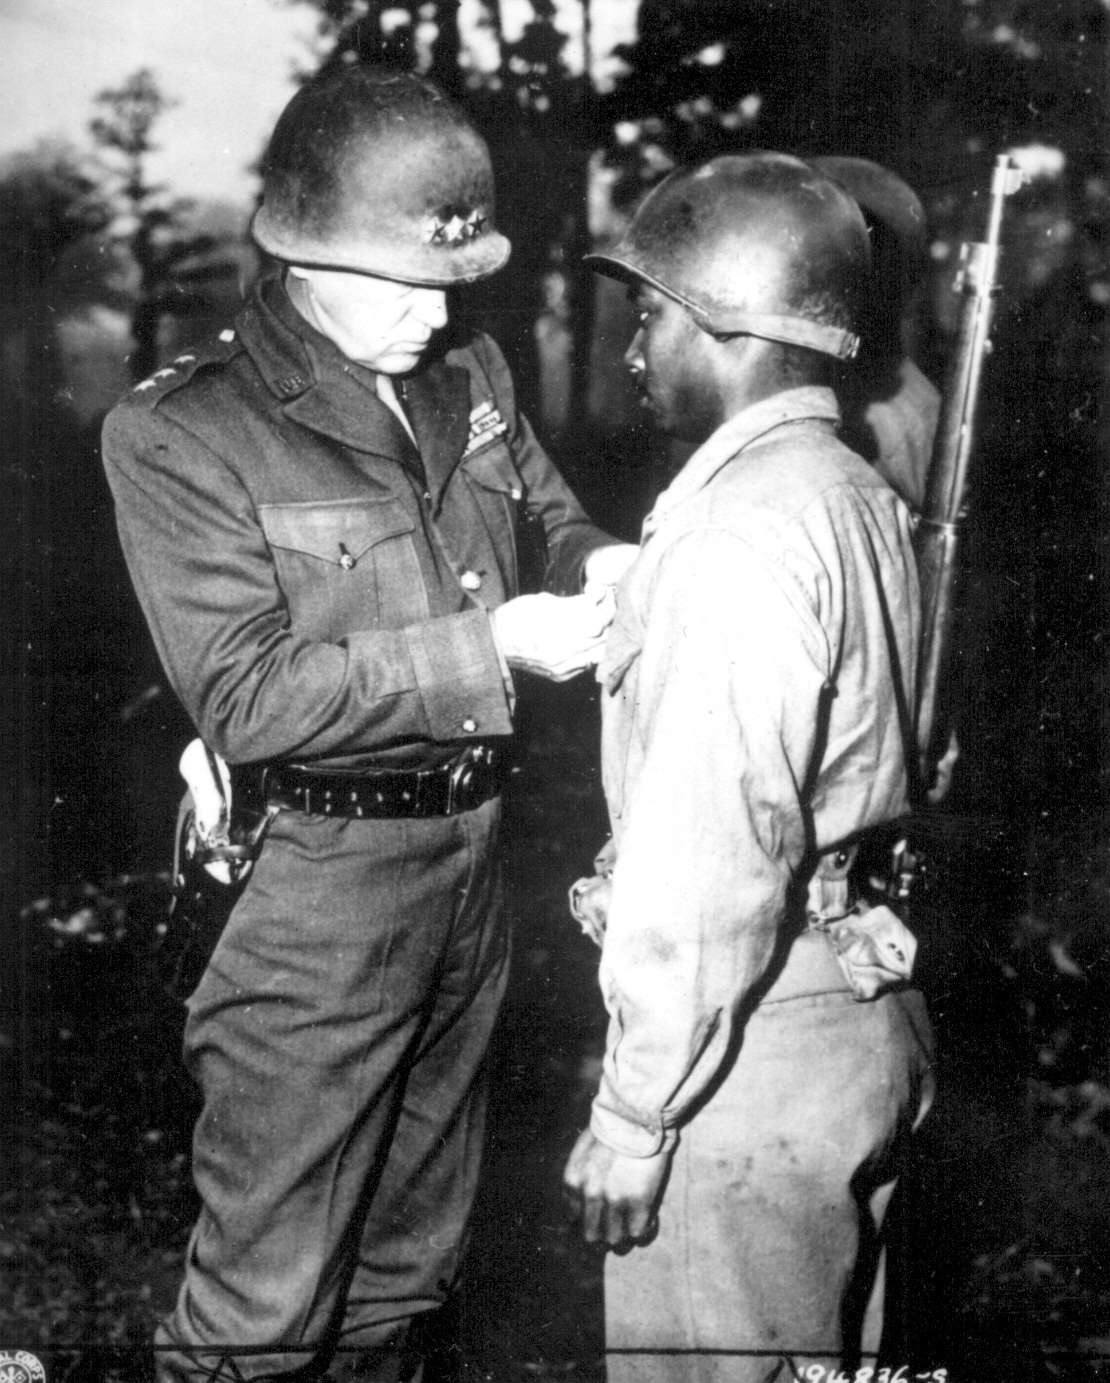 Lieutenant General Patton of the US 3rd Army awarding the Silver Star medal to Private Ernest Jenkins for gallantry during actions at Chateaudun, France, 13 Oct 1944